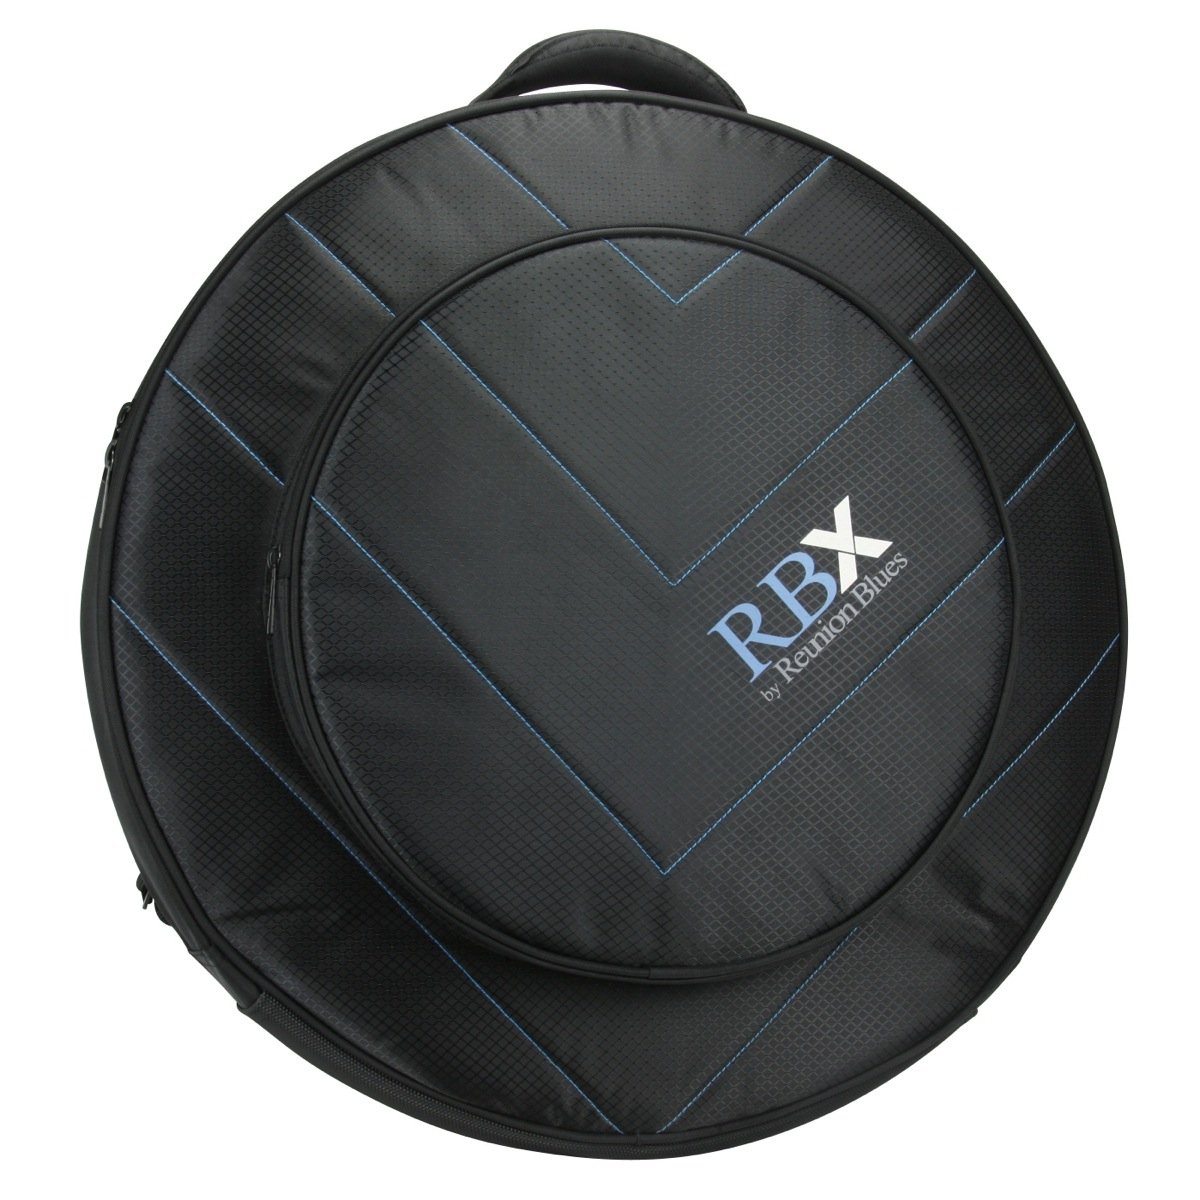 Reunion Blues RBXCM22 22in Cymbal Bag -  RBX-CM22